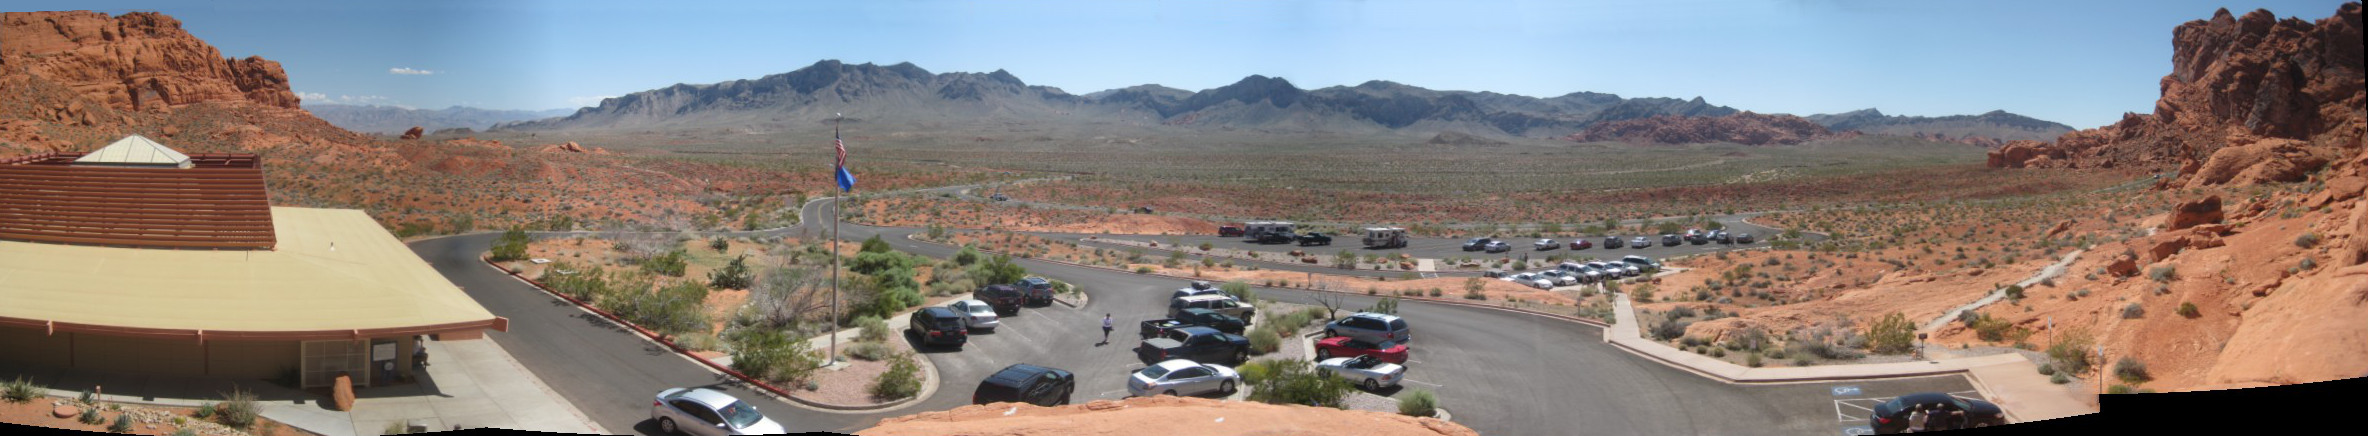 panoramic photo of the Valley of Fire, taken from the climbing rock next to the visitor's center